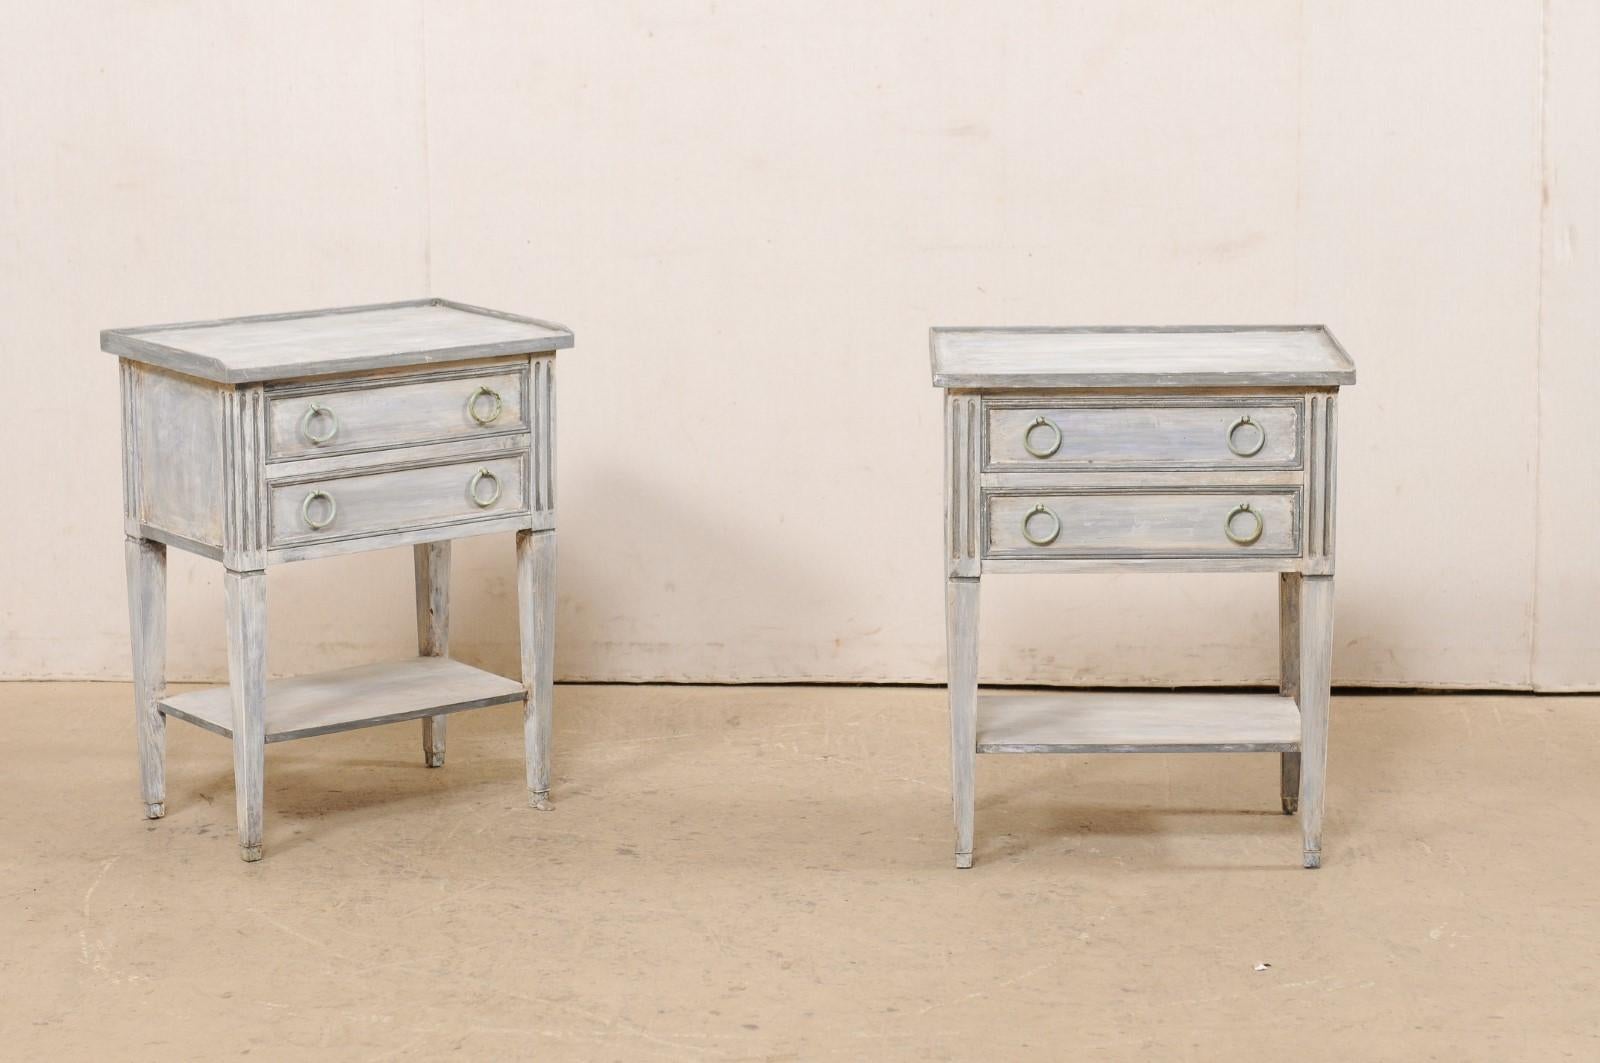 A vintage pair of painted wood side chests, with lower shelf, from American furniture maker 